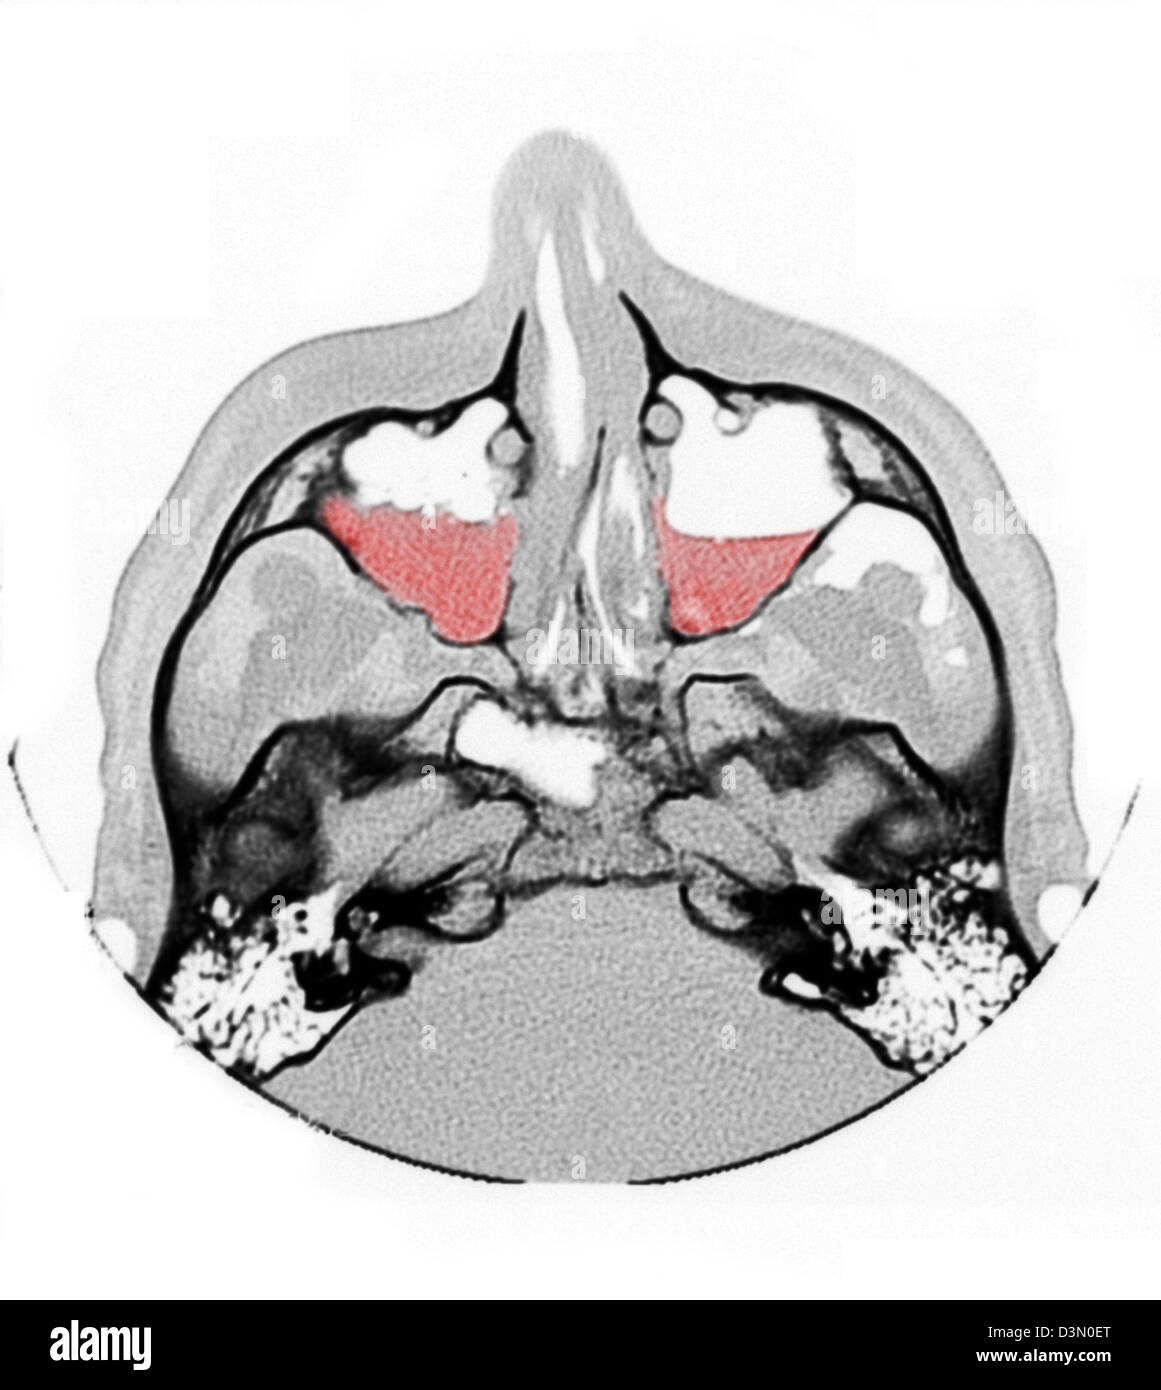 CT scan image showing bilateral maxillary sinus fractures Stock Photo